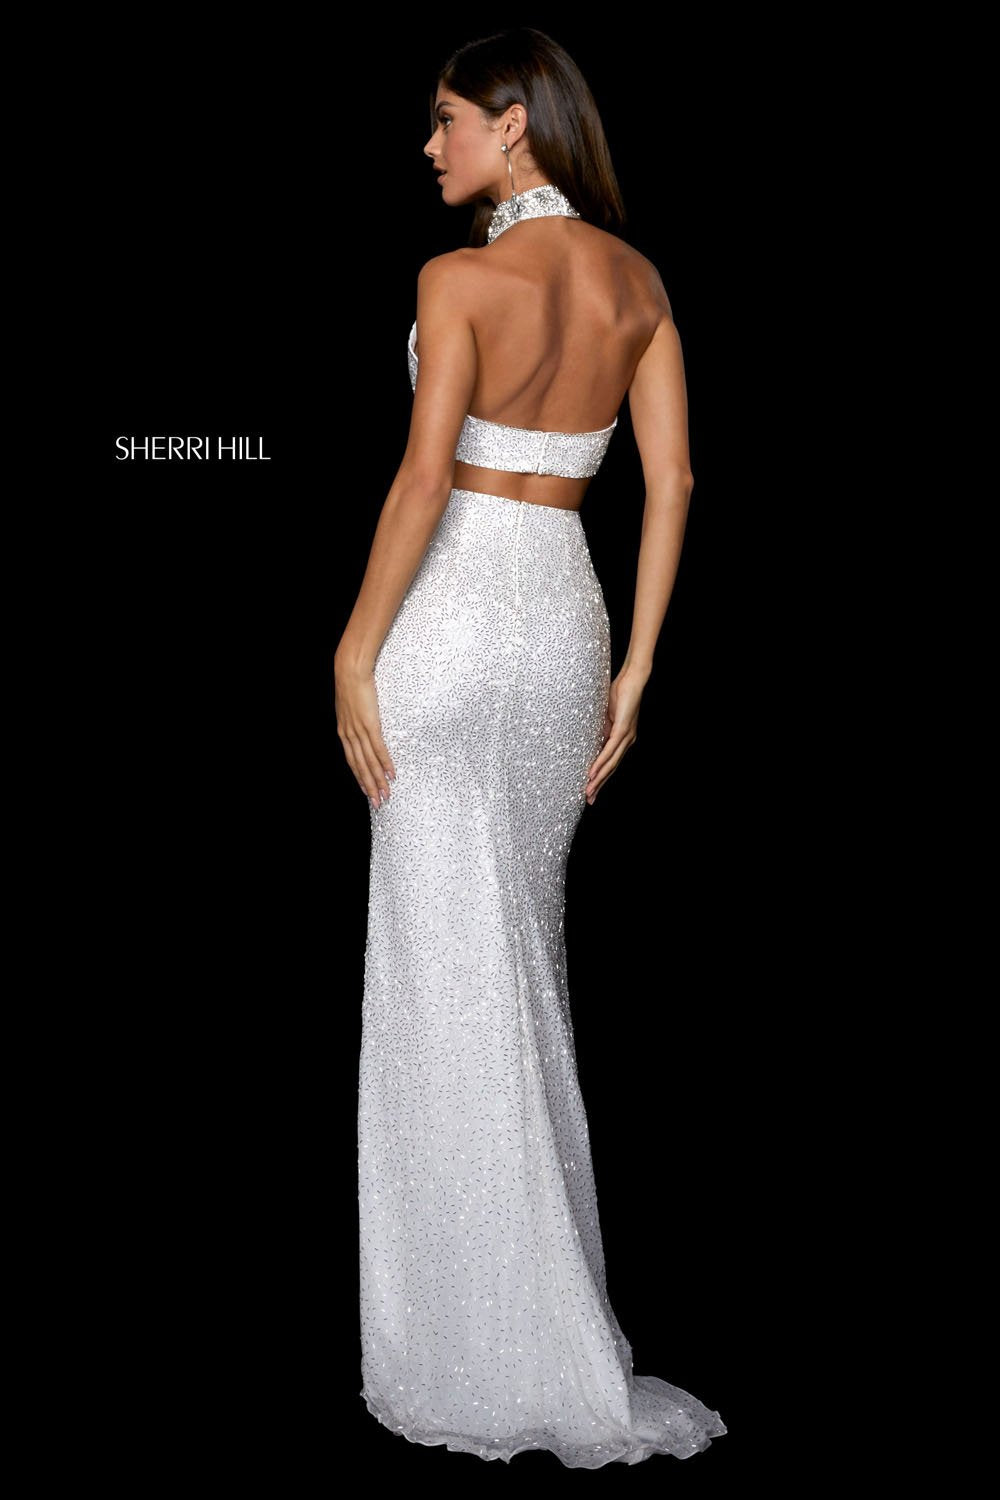 Sherri Hill 53495 dress images in these colors: Light Blue Silver, Yellow Silver, Black, Ivory Silver, Nude Silver.